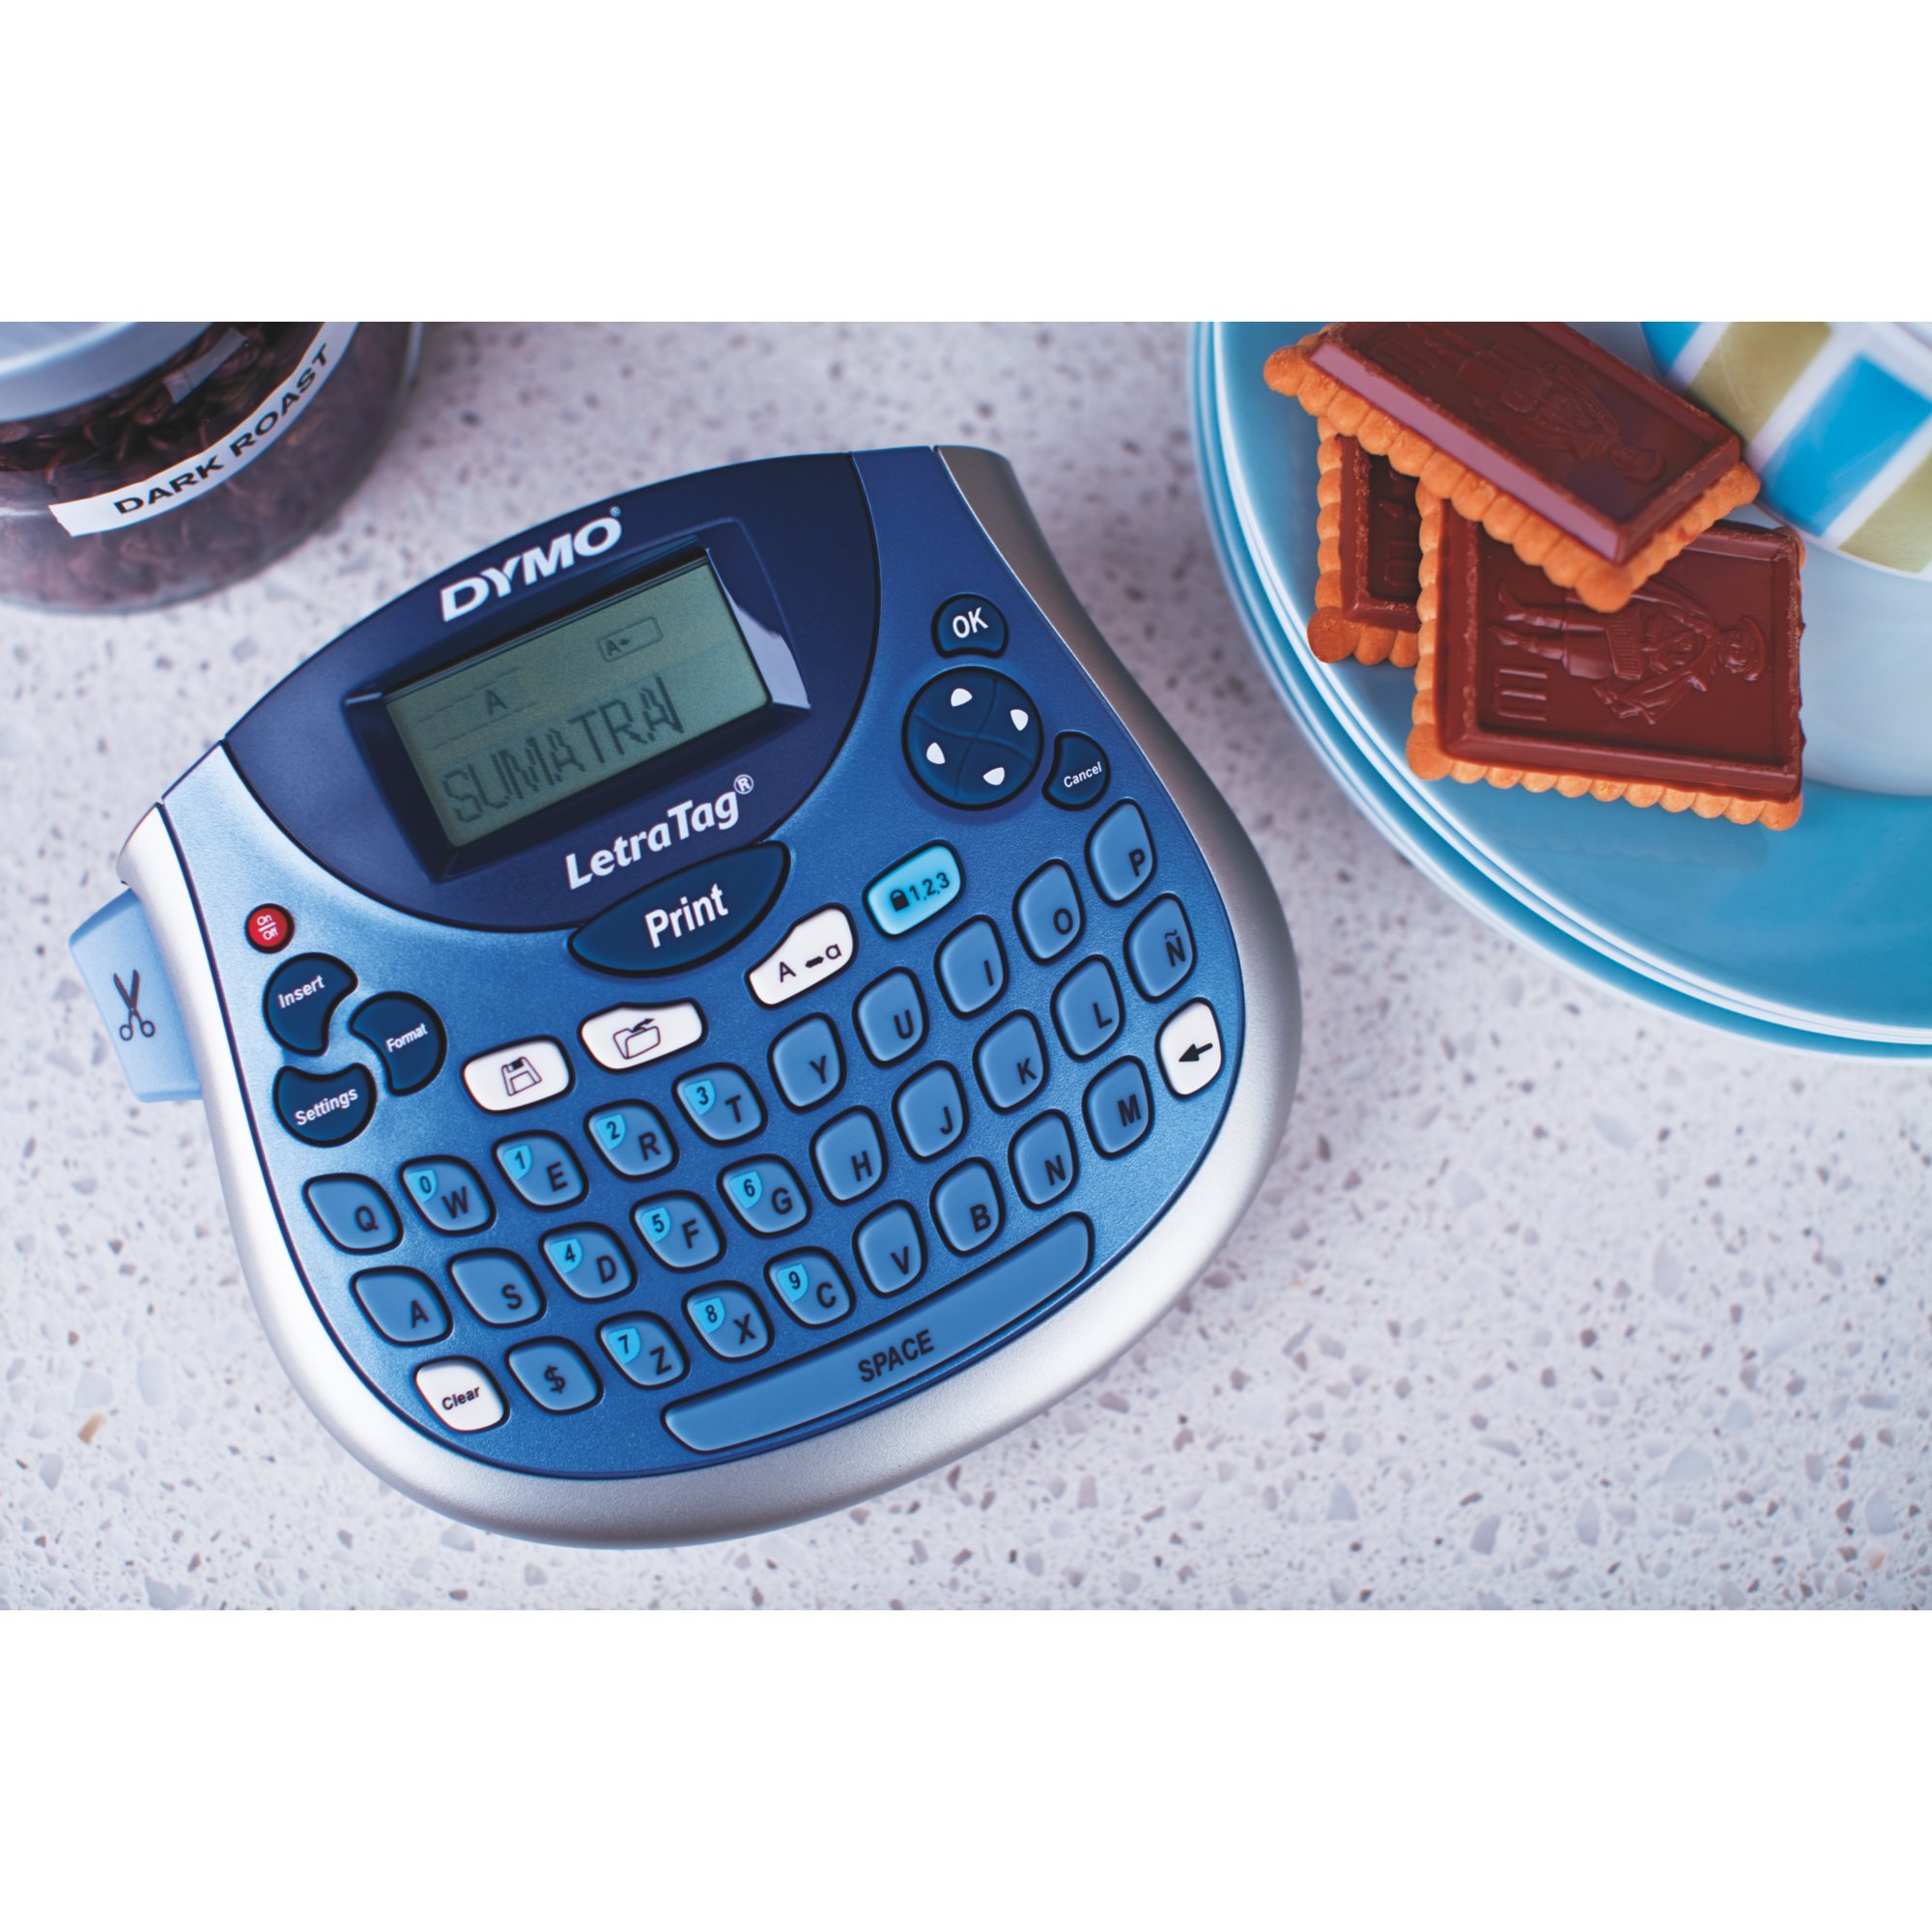 DYMO LetraTag LT-100T Compact, Portable Label Maker with QWERTY Keyboard  (1733011),Assorted